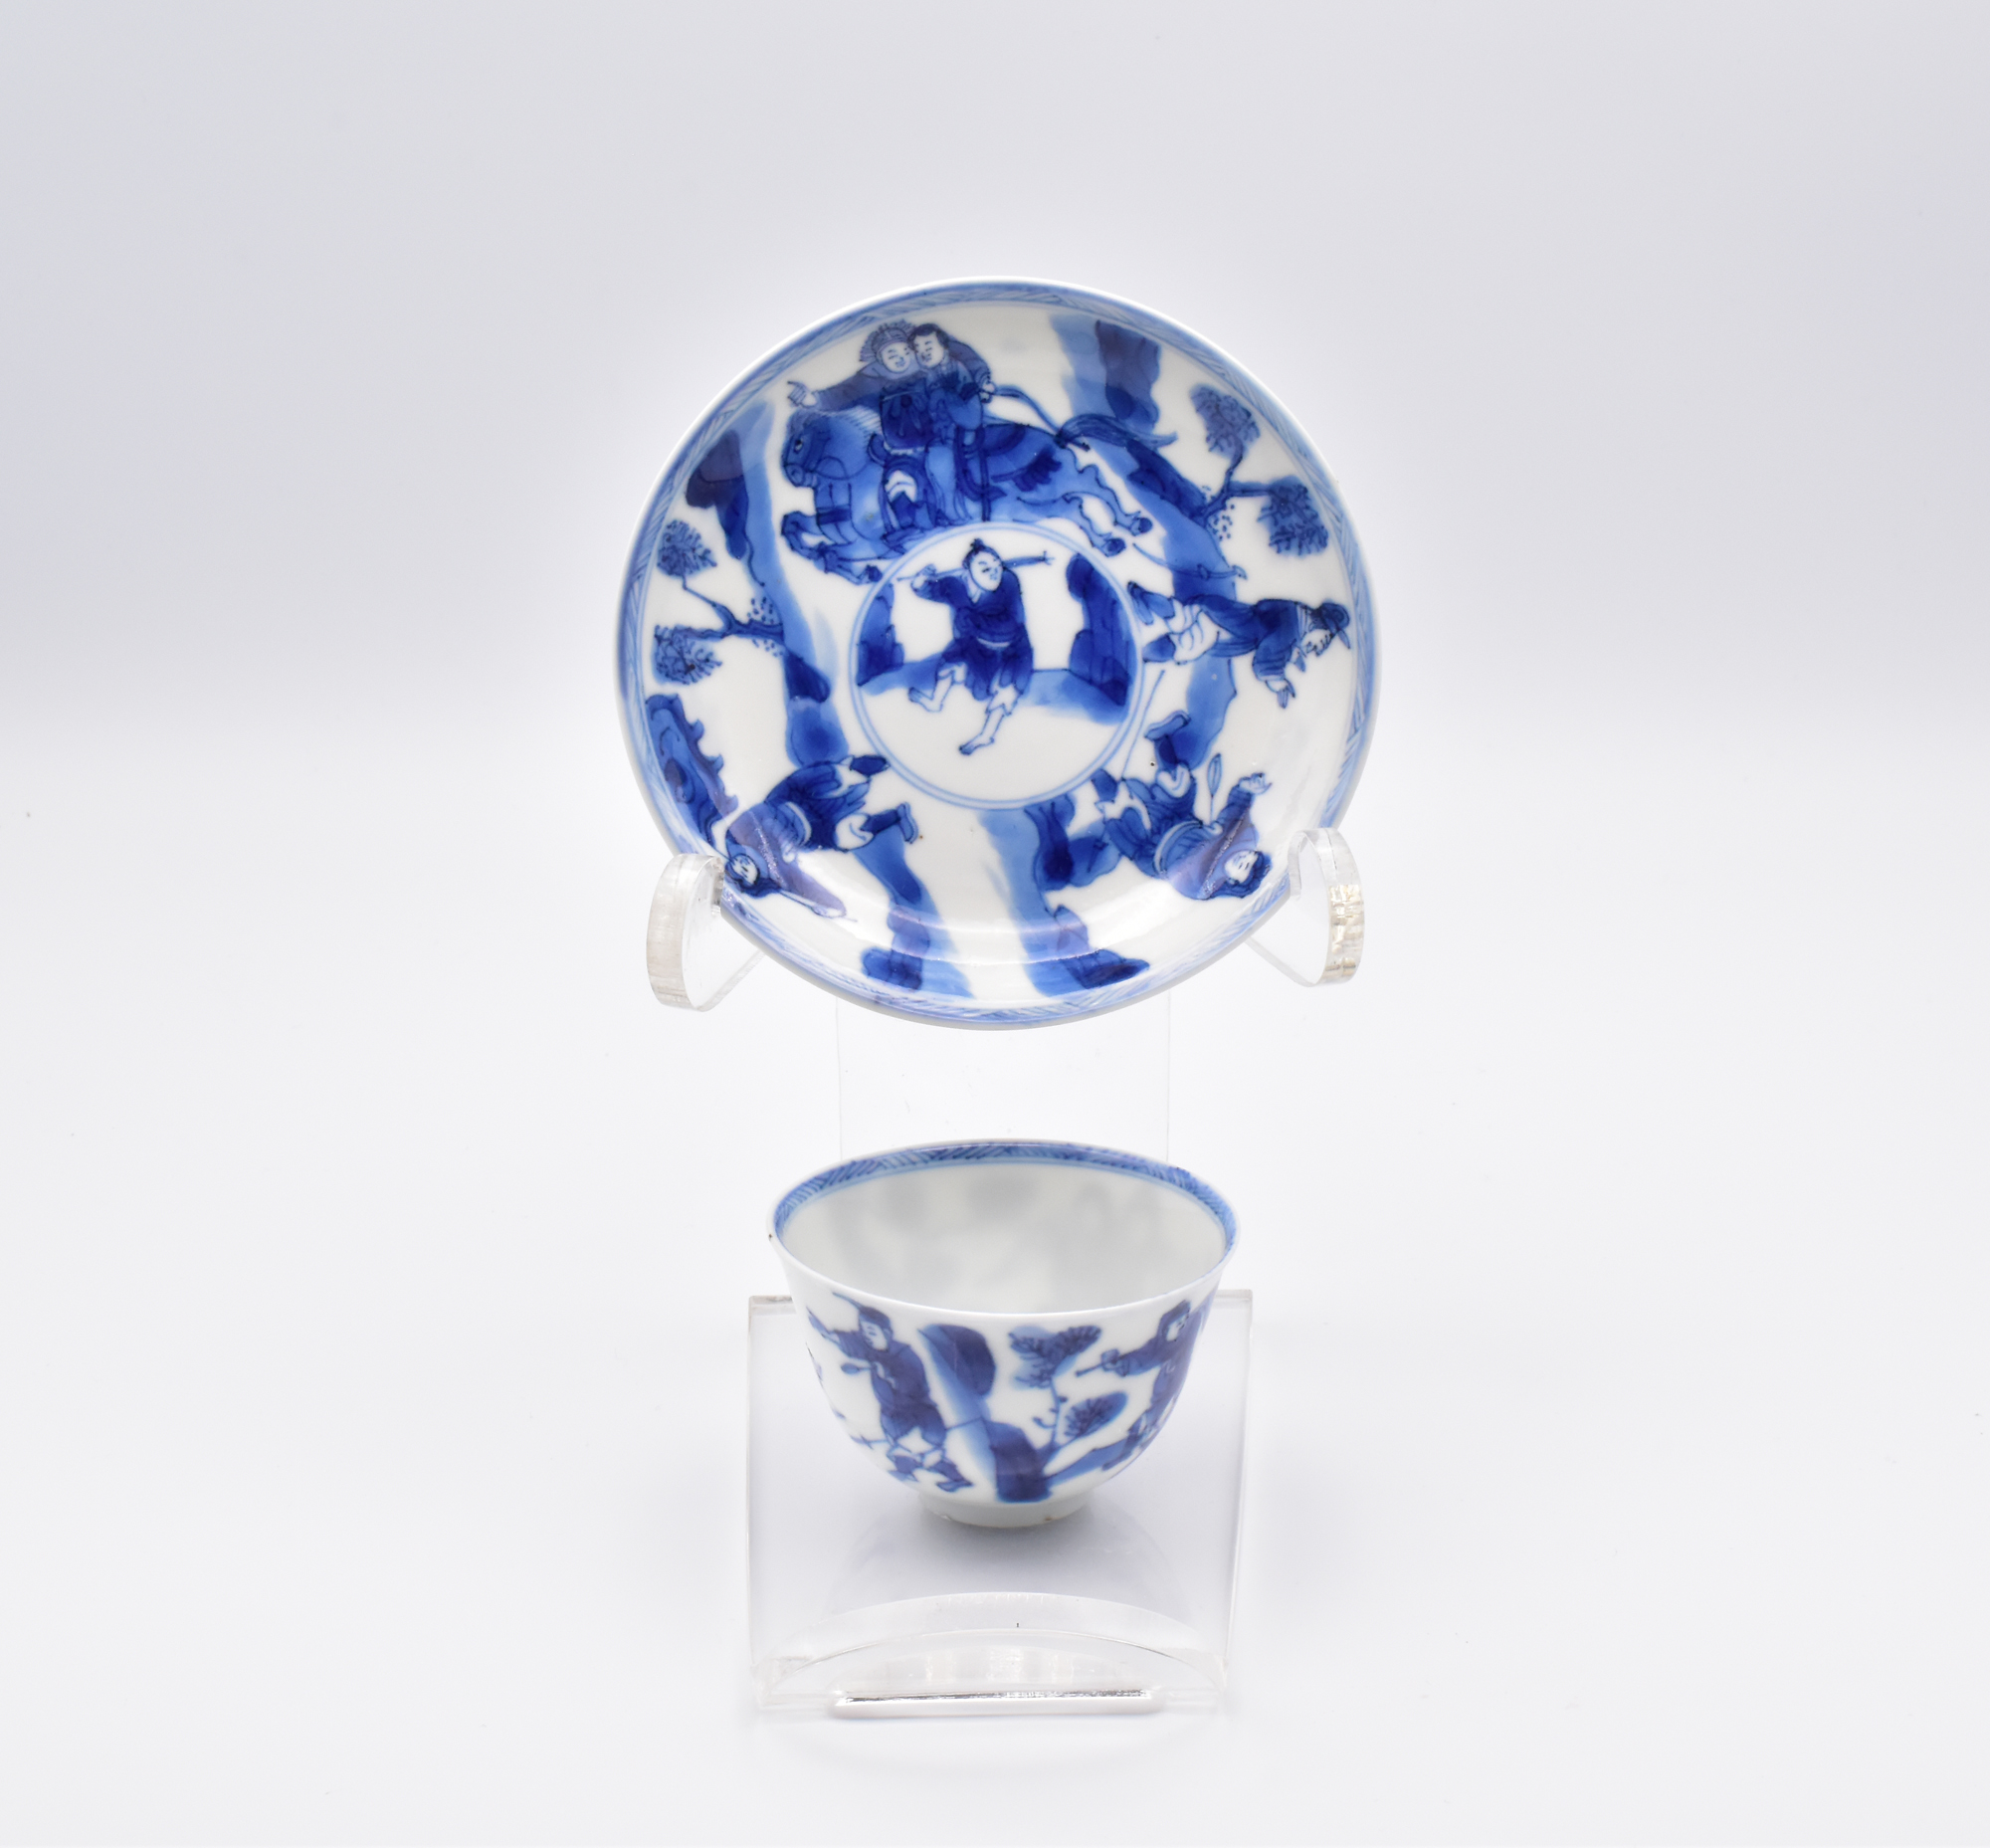 A CHINESE BLUE AND WHITE PORCELAIN TEA BOWL AND SAUCER, QING DYNASTY, KANGXI PERIOD, 1662 – 1722